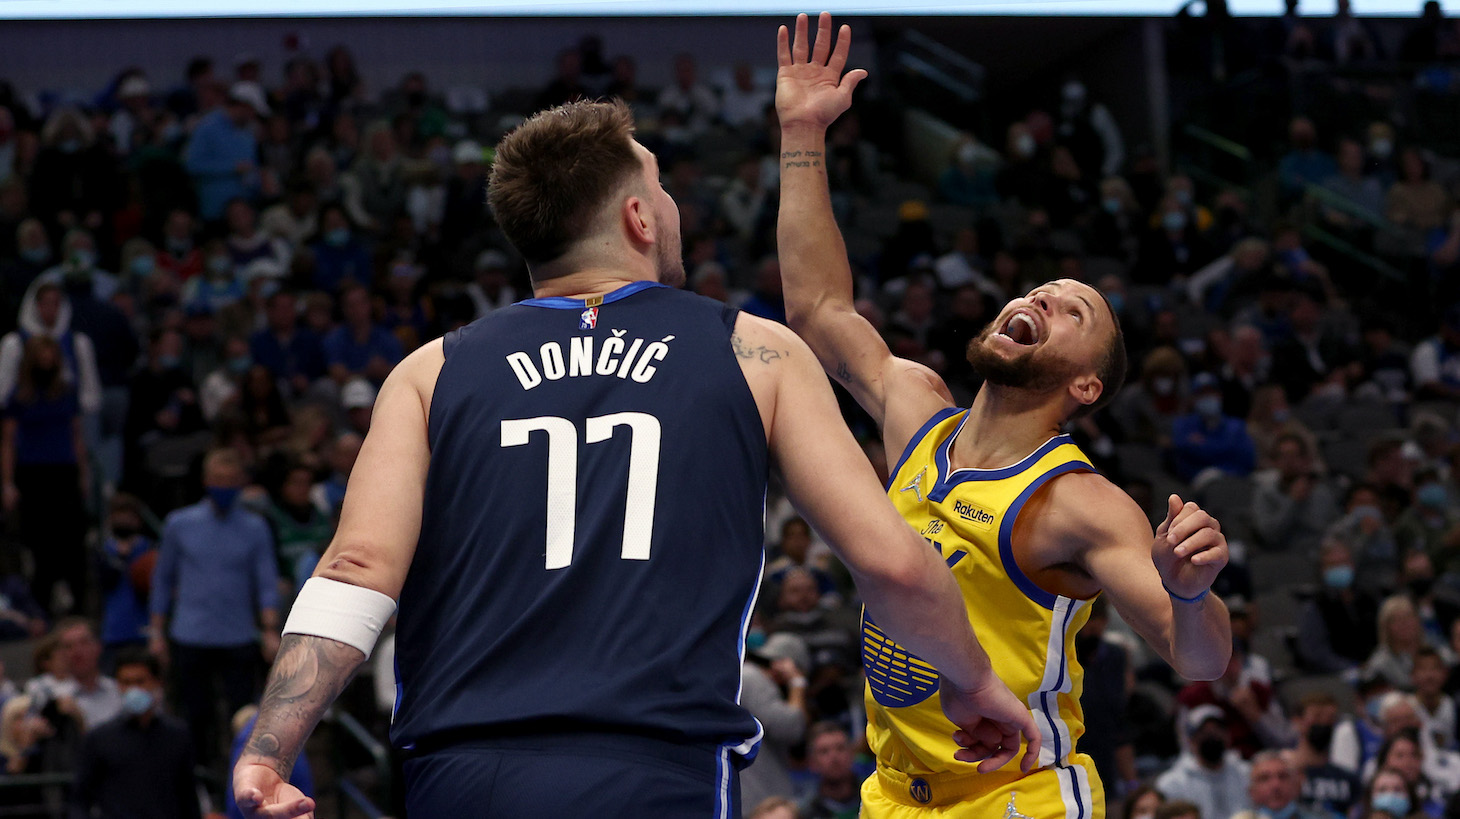 DALLAS, TEXAS - JANUARY 05: Stephen Curry #30 of the Golden State Warriors reacts after being fouled by Luka Doncic #77 of the Dallas Mavericks in the third quarter at American Airlines Center on January 05, 2022 in Dallas, Texas. NOTE TO USER: User expressly acknowledges and agrees that, by downloading and or using this photograph, User is consenting to the terms and conditions of the Getty Images License Agreement. (Photo by Tom Pennington/Getty Images)